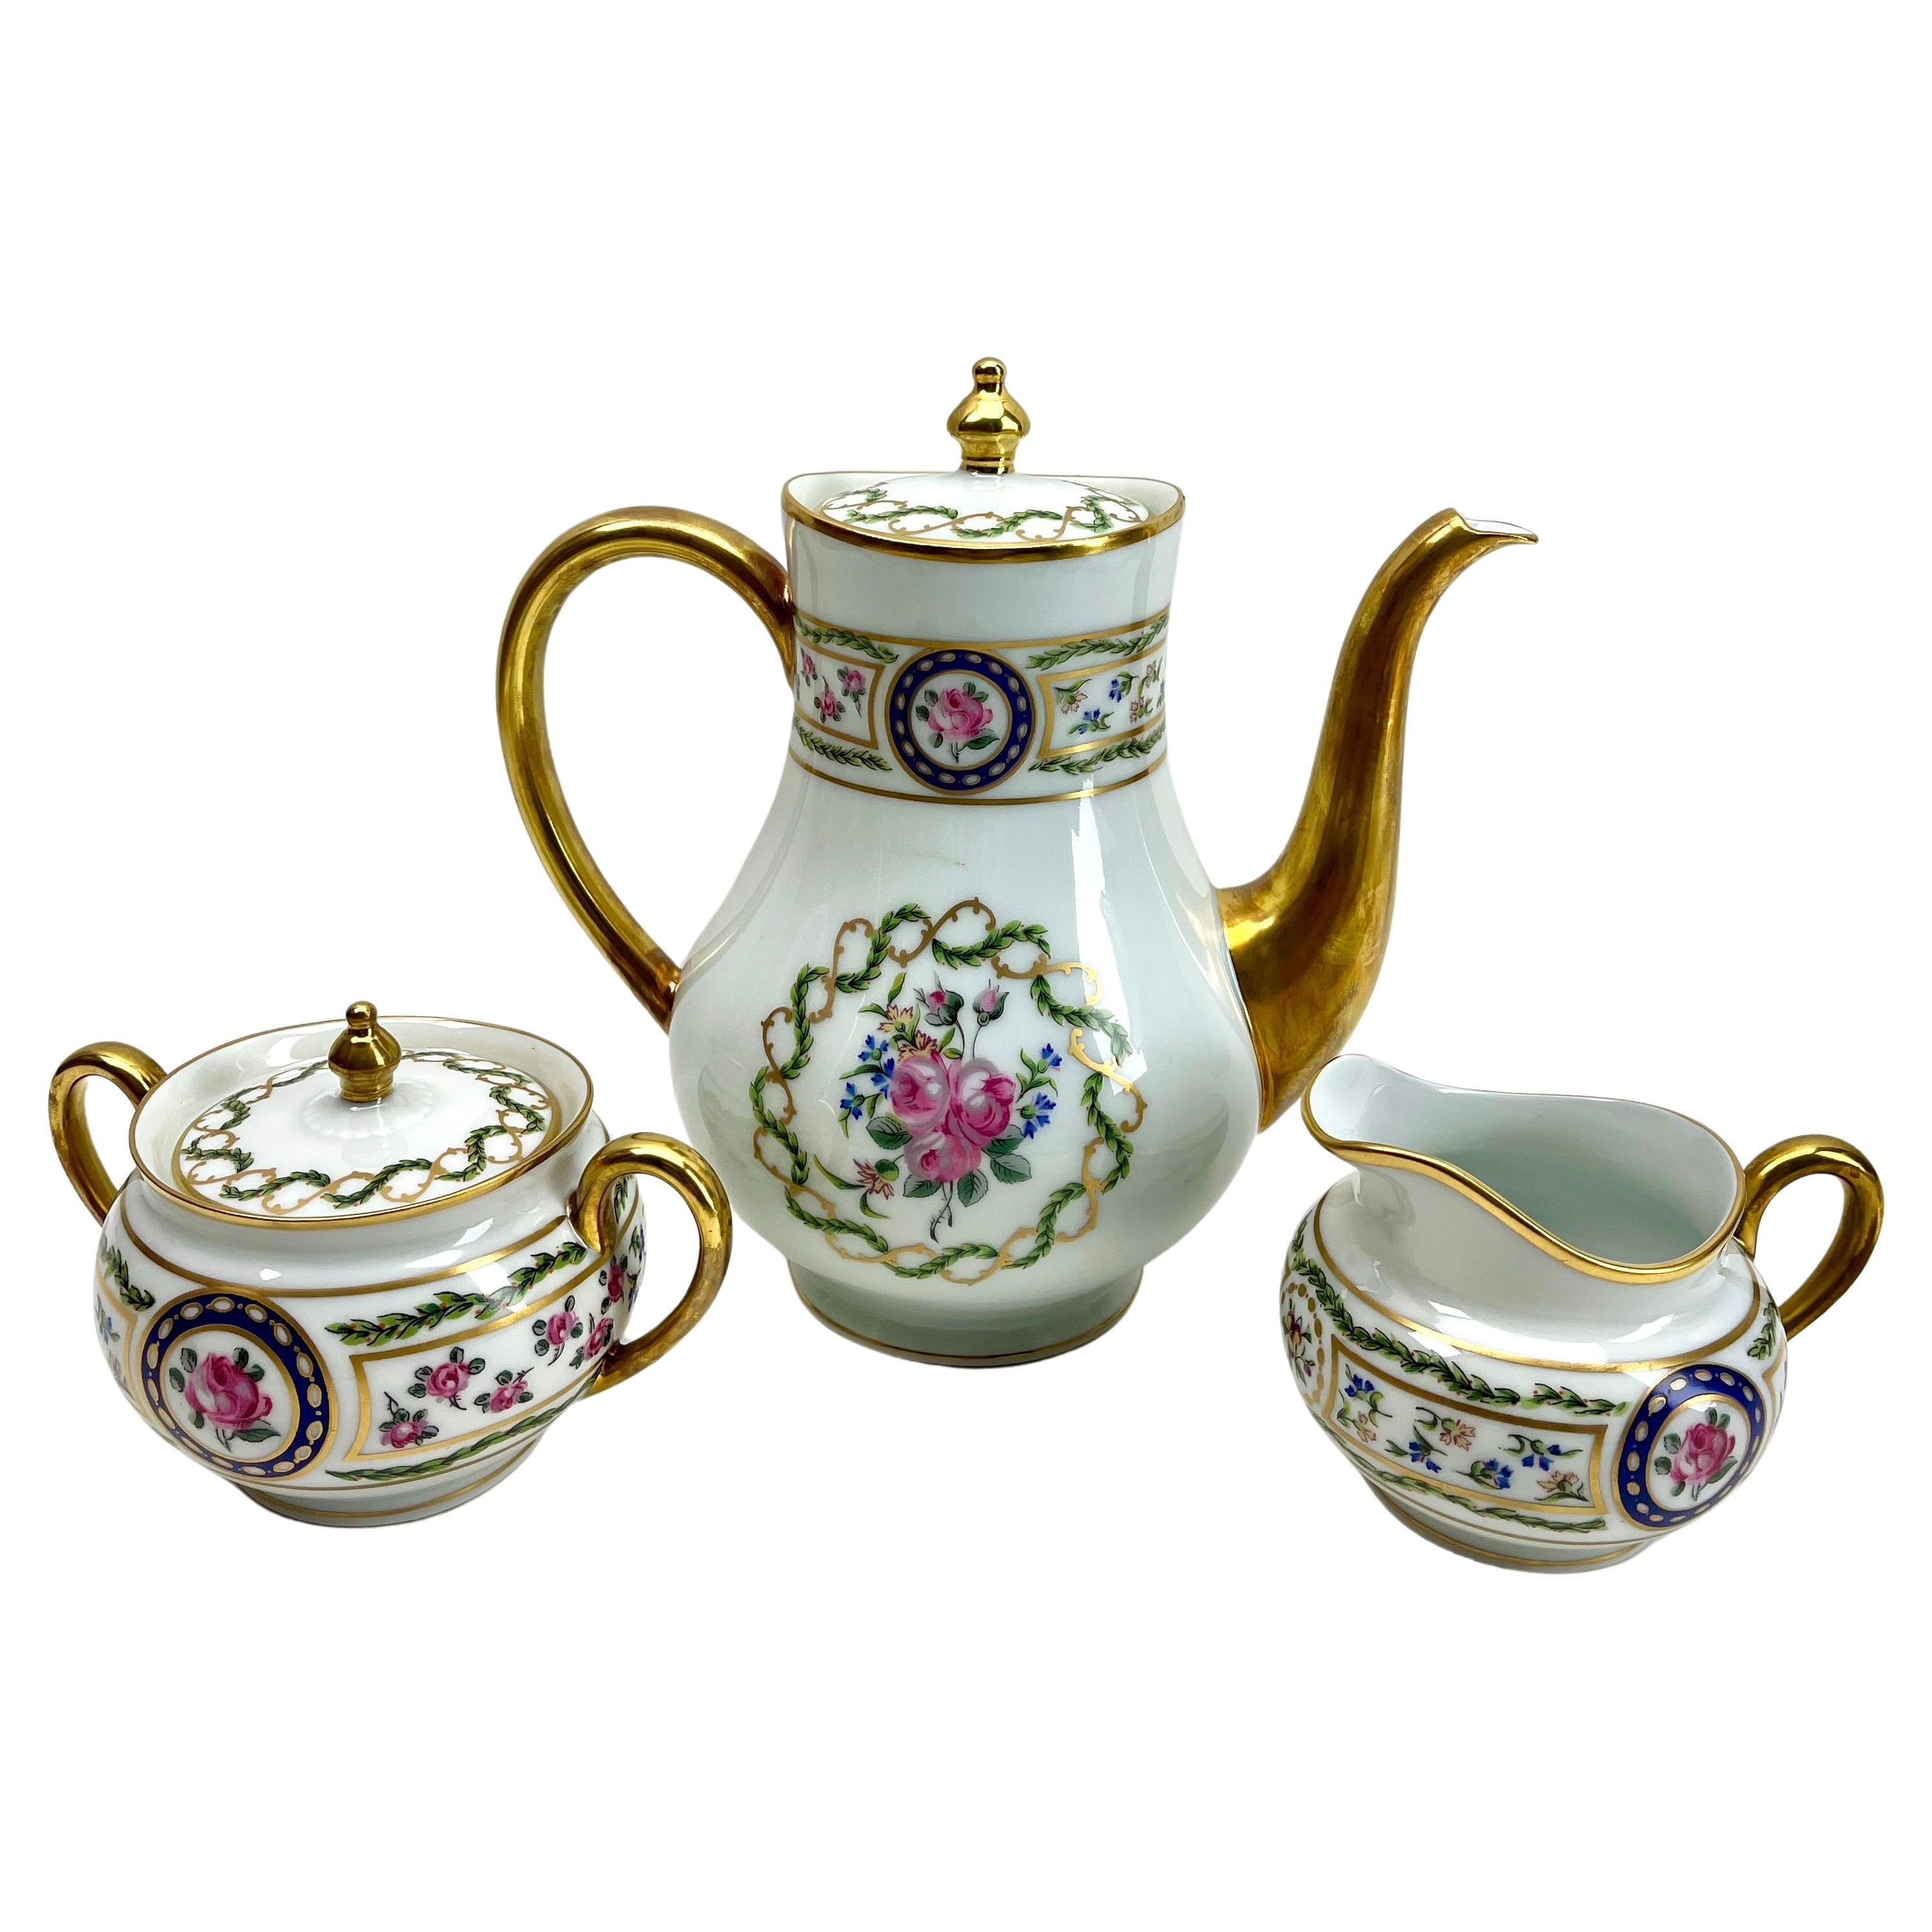 This is a set of 9 pieces Limoges Louveciennes porcelain with hand applied gold highlights and Flowers decoration
Cute additions for a formal table.

Limoges is one of the best porcelain factories in France.

Please don't hesitate to get in touch